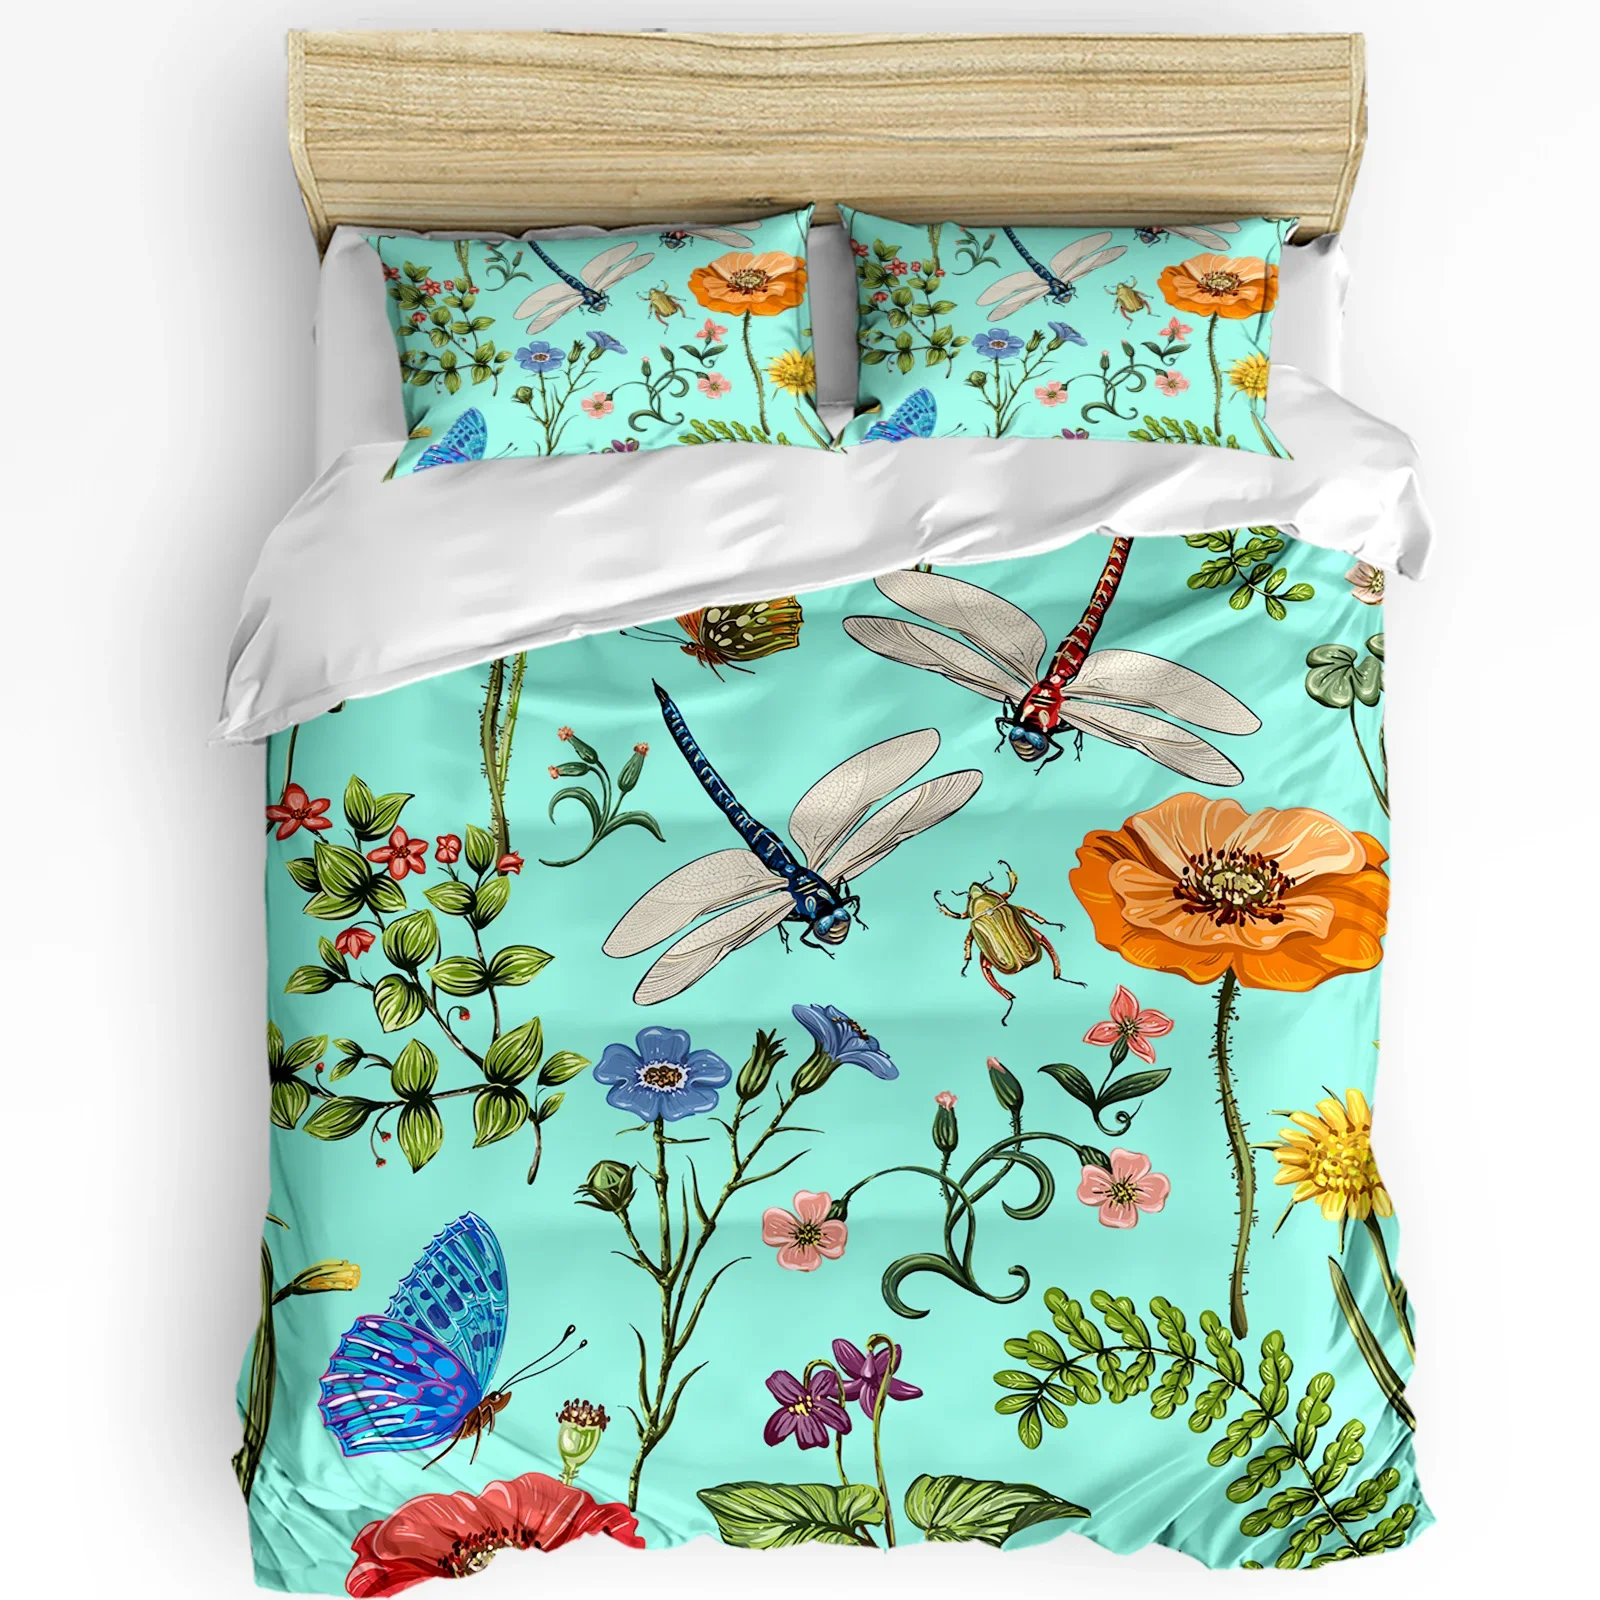 

Dragonfly Flower Leaf Insect Butterfly Duvet Cover Bed Bedding Set Home Quilt Cover Pillowcases Bedroom Bedding Set No Sheet